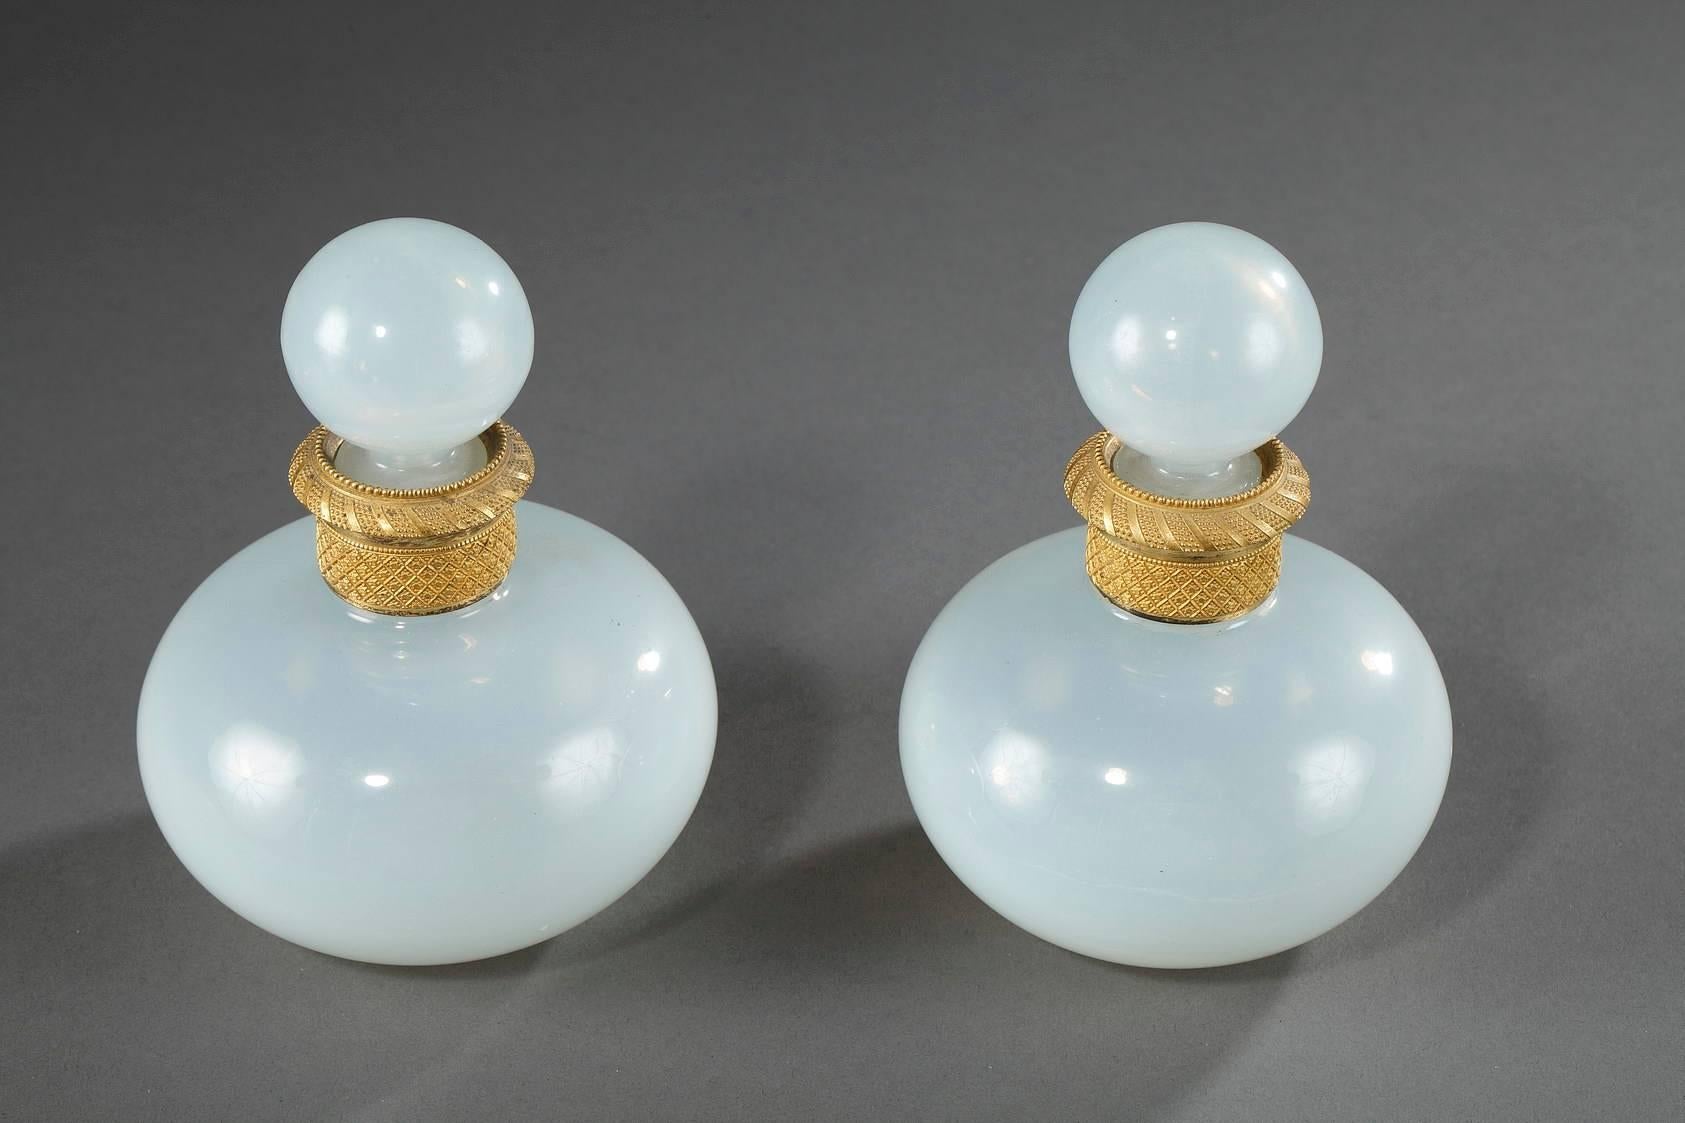 Pair of white Opaline crystal flasks with their ball-shaped stoppers. Each neck is a gilt bronze ring that is intricately sculpted with latticework, small flowers, and delicate beadwork. This exquisite example of translucent crystal is